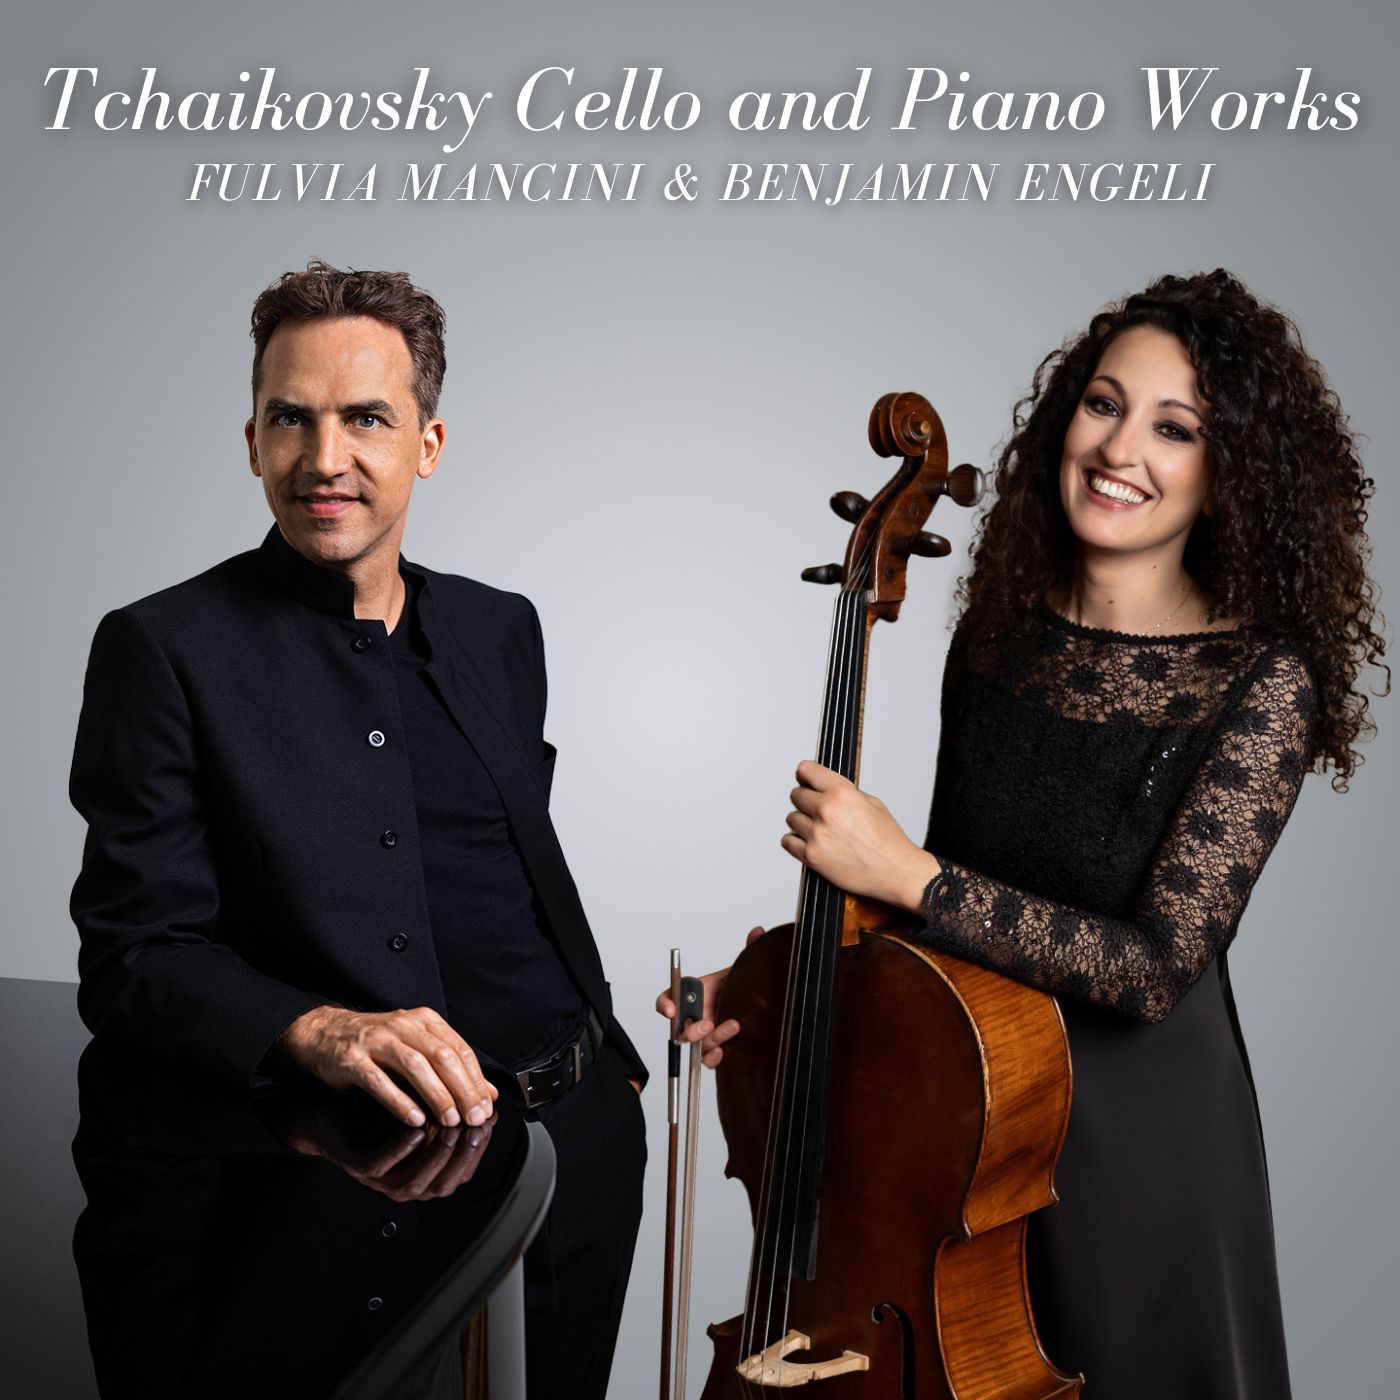 Tchaikovsky: Cello and Piano Works